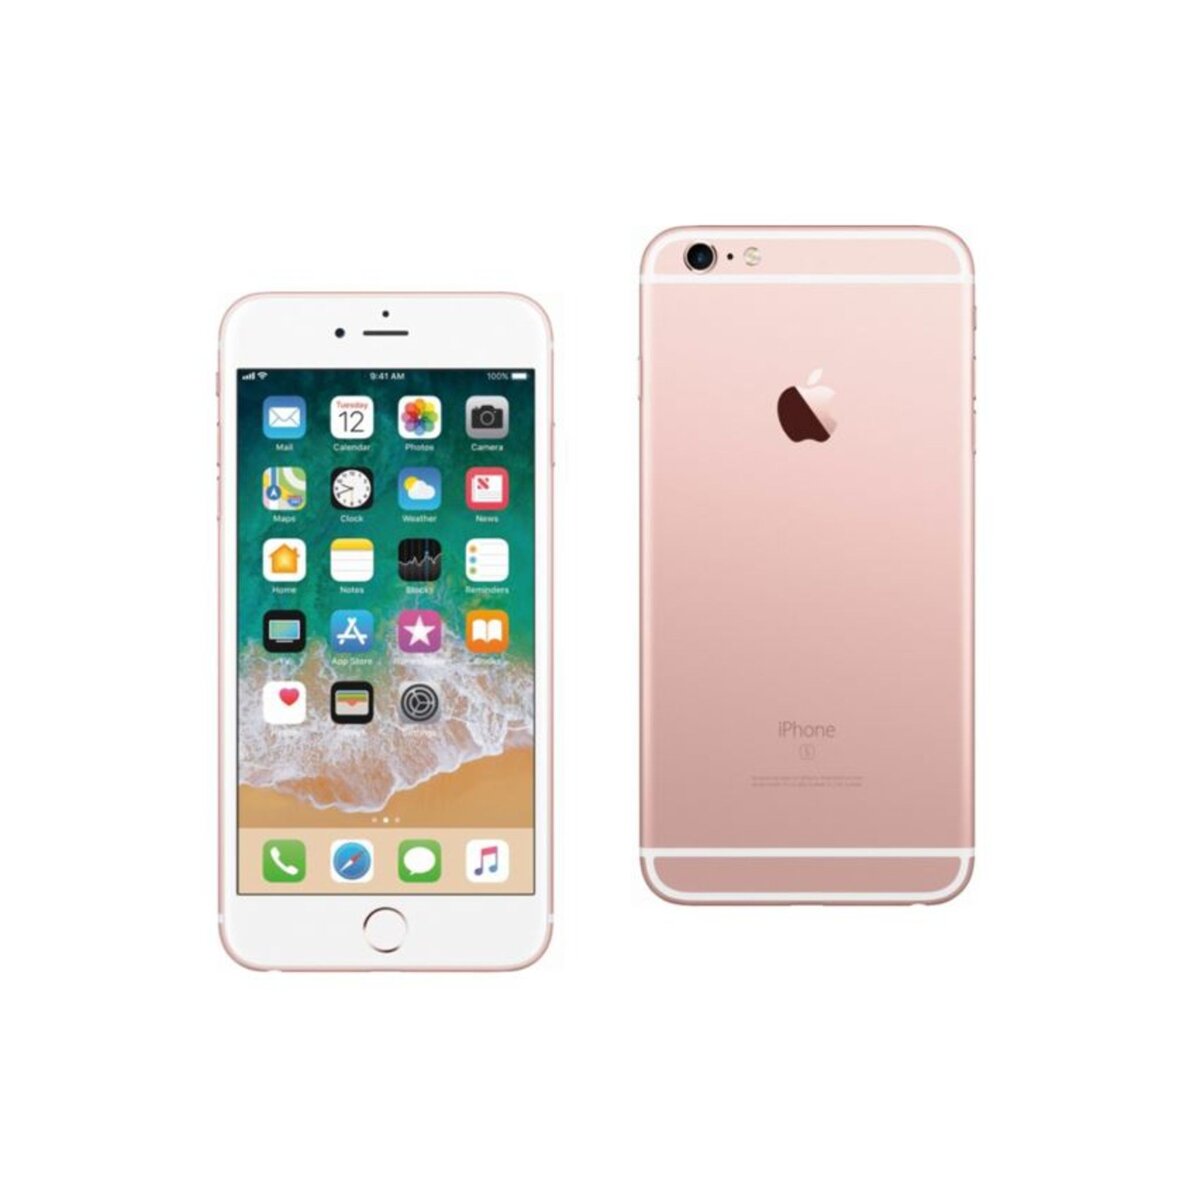 APPLE iPhone - 6S - Reconditionné Grade B - 16 Go - Or Rose